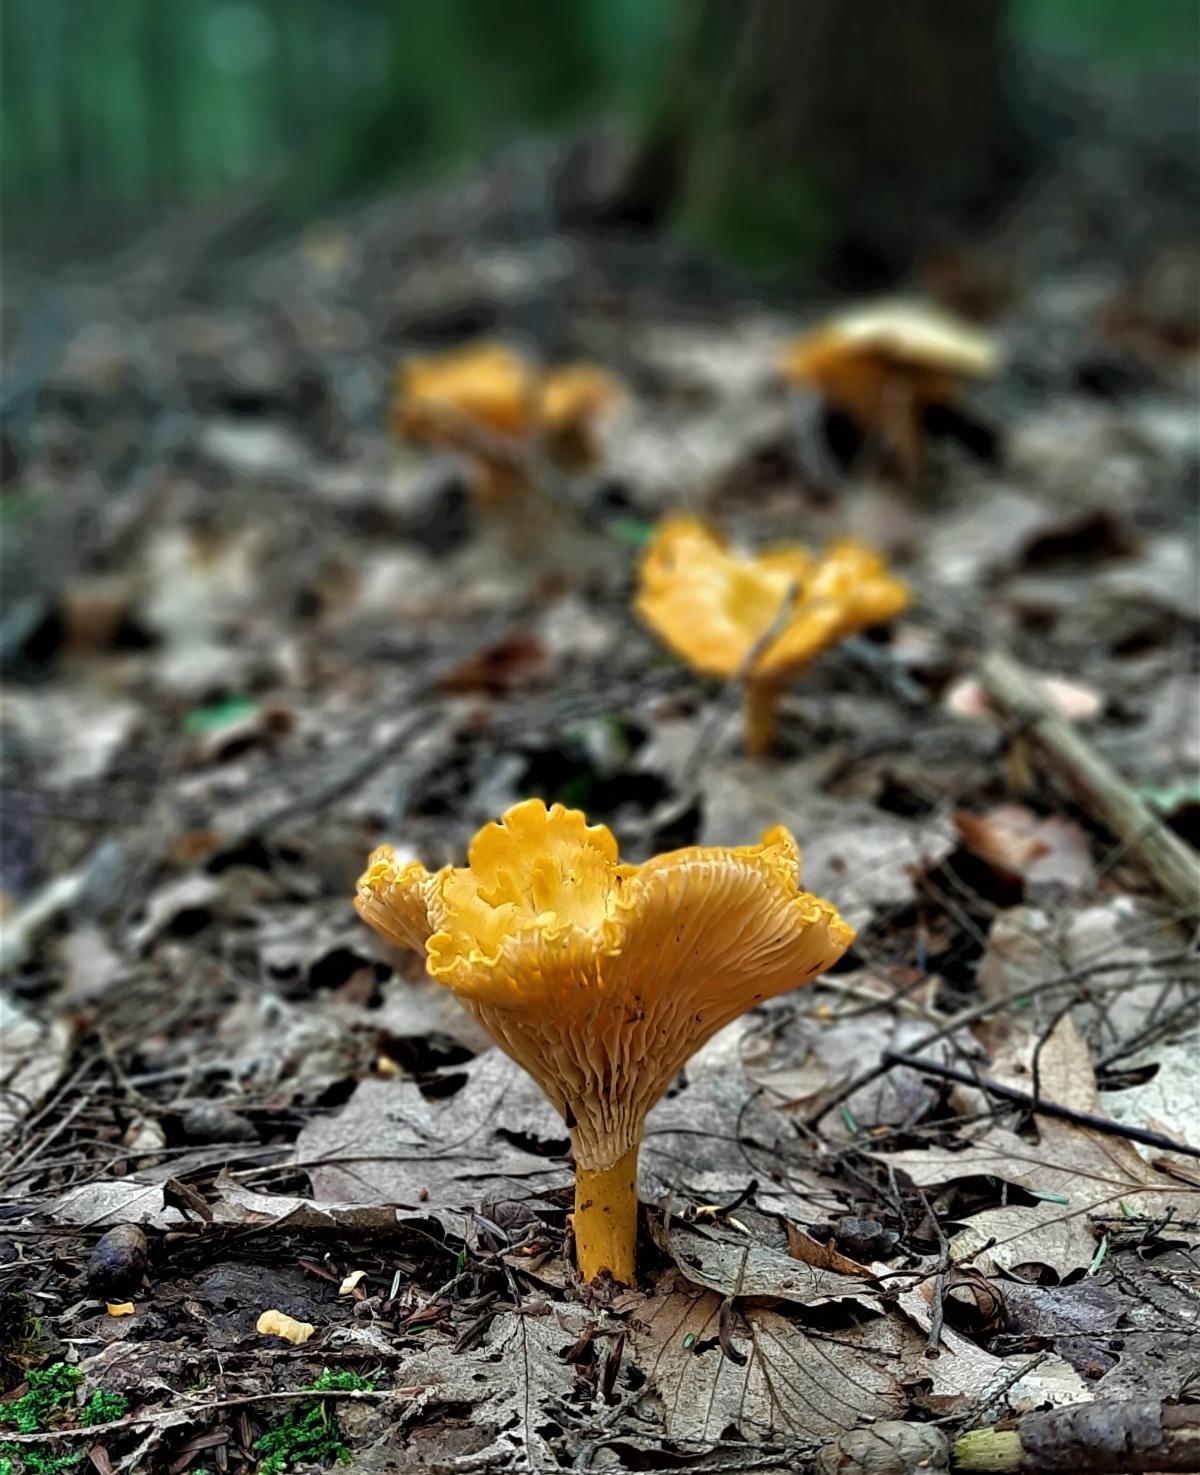 A chanterelle on the forest floor.